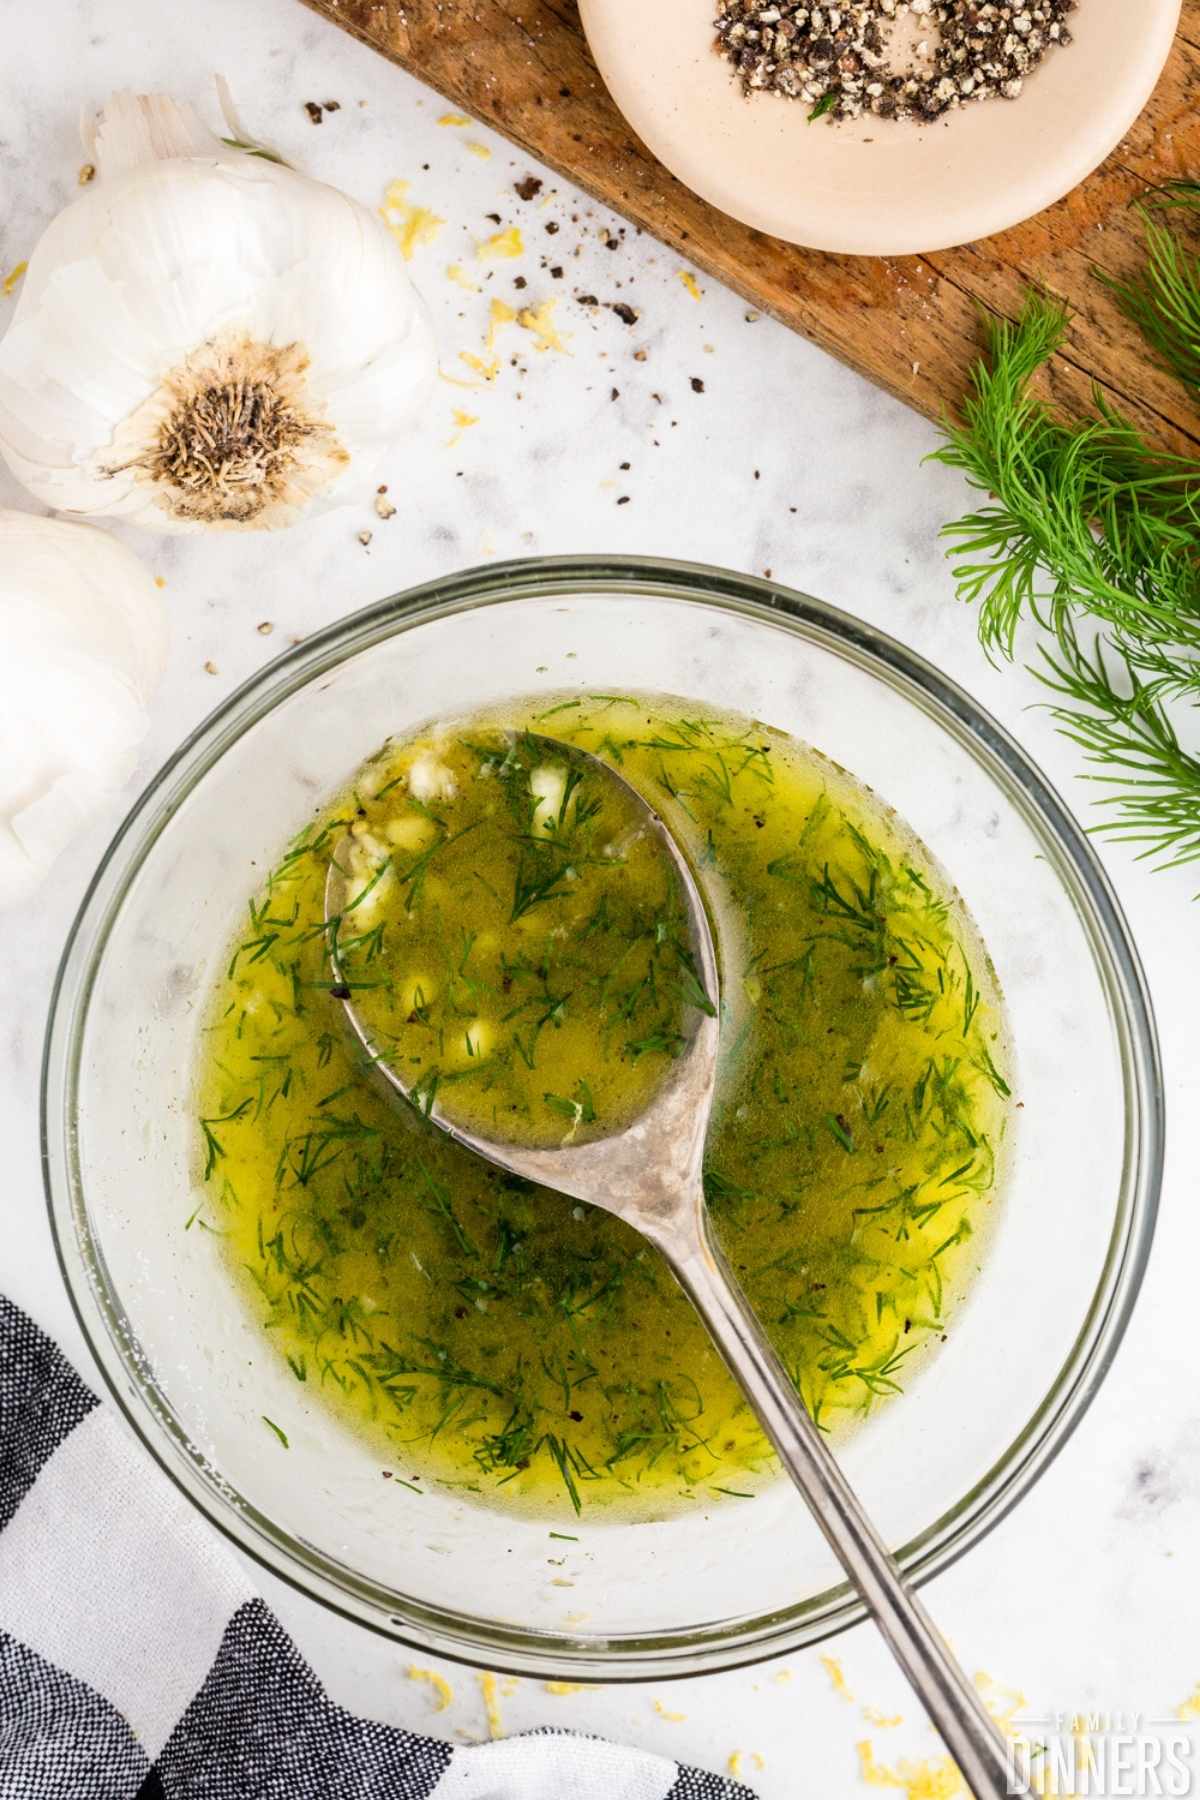 Lemon dill marinade in a clear glass bowl with a large silver spoon ready to spoon lemon vinaigrette on to meat for a salmon marinade or lemon dill chicken marinade.